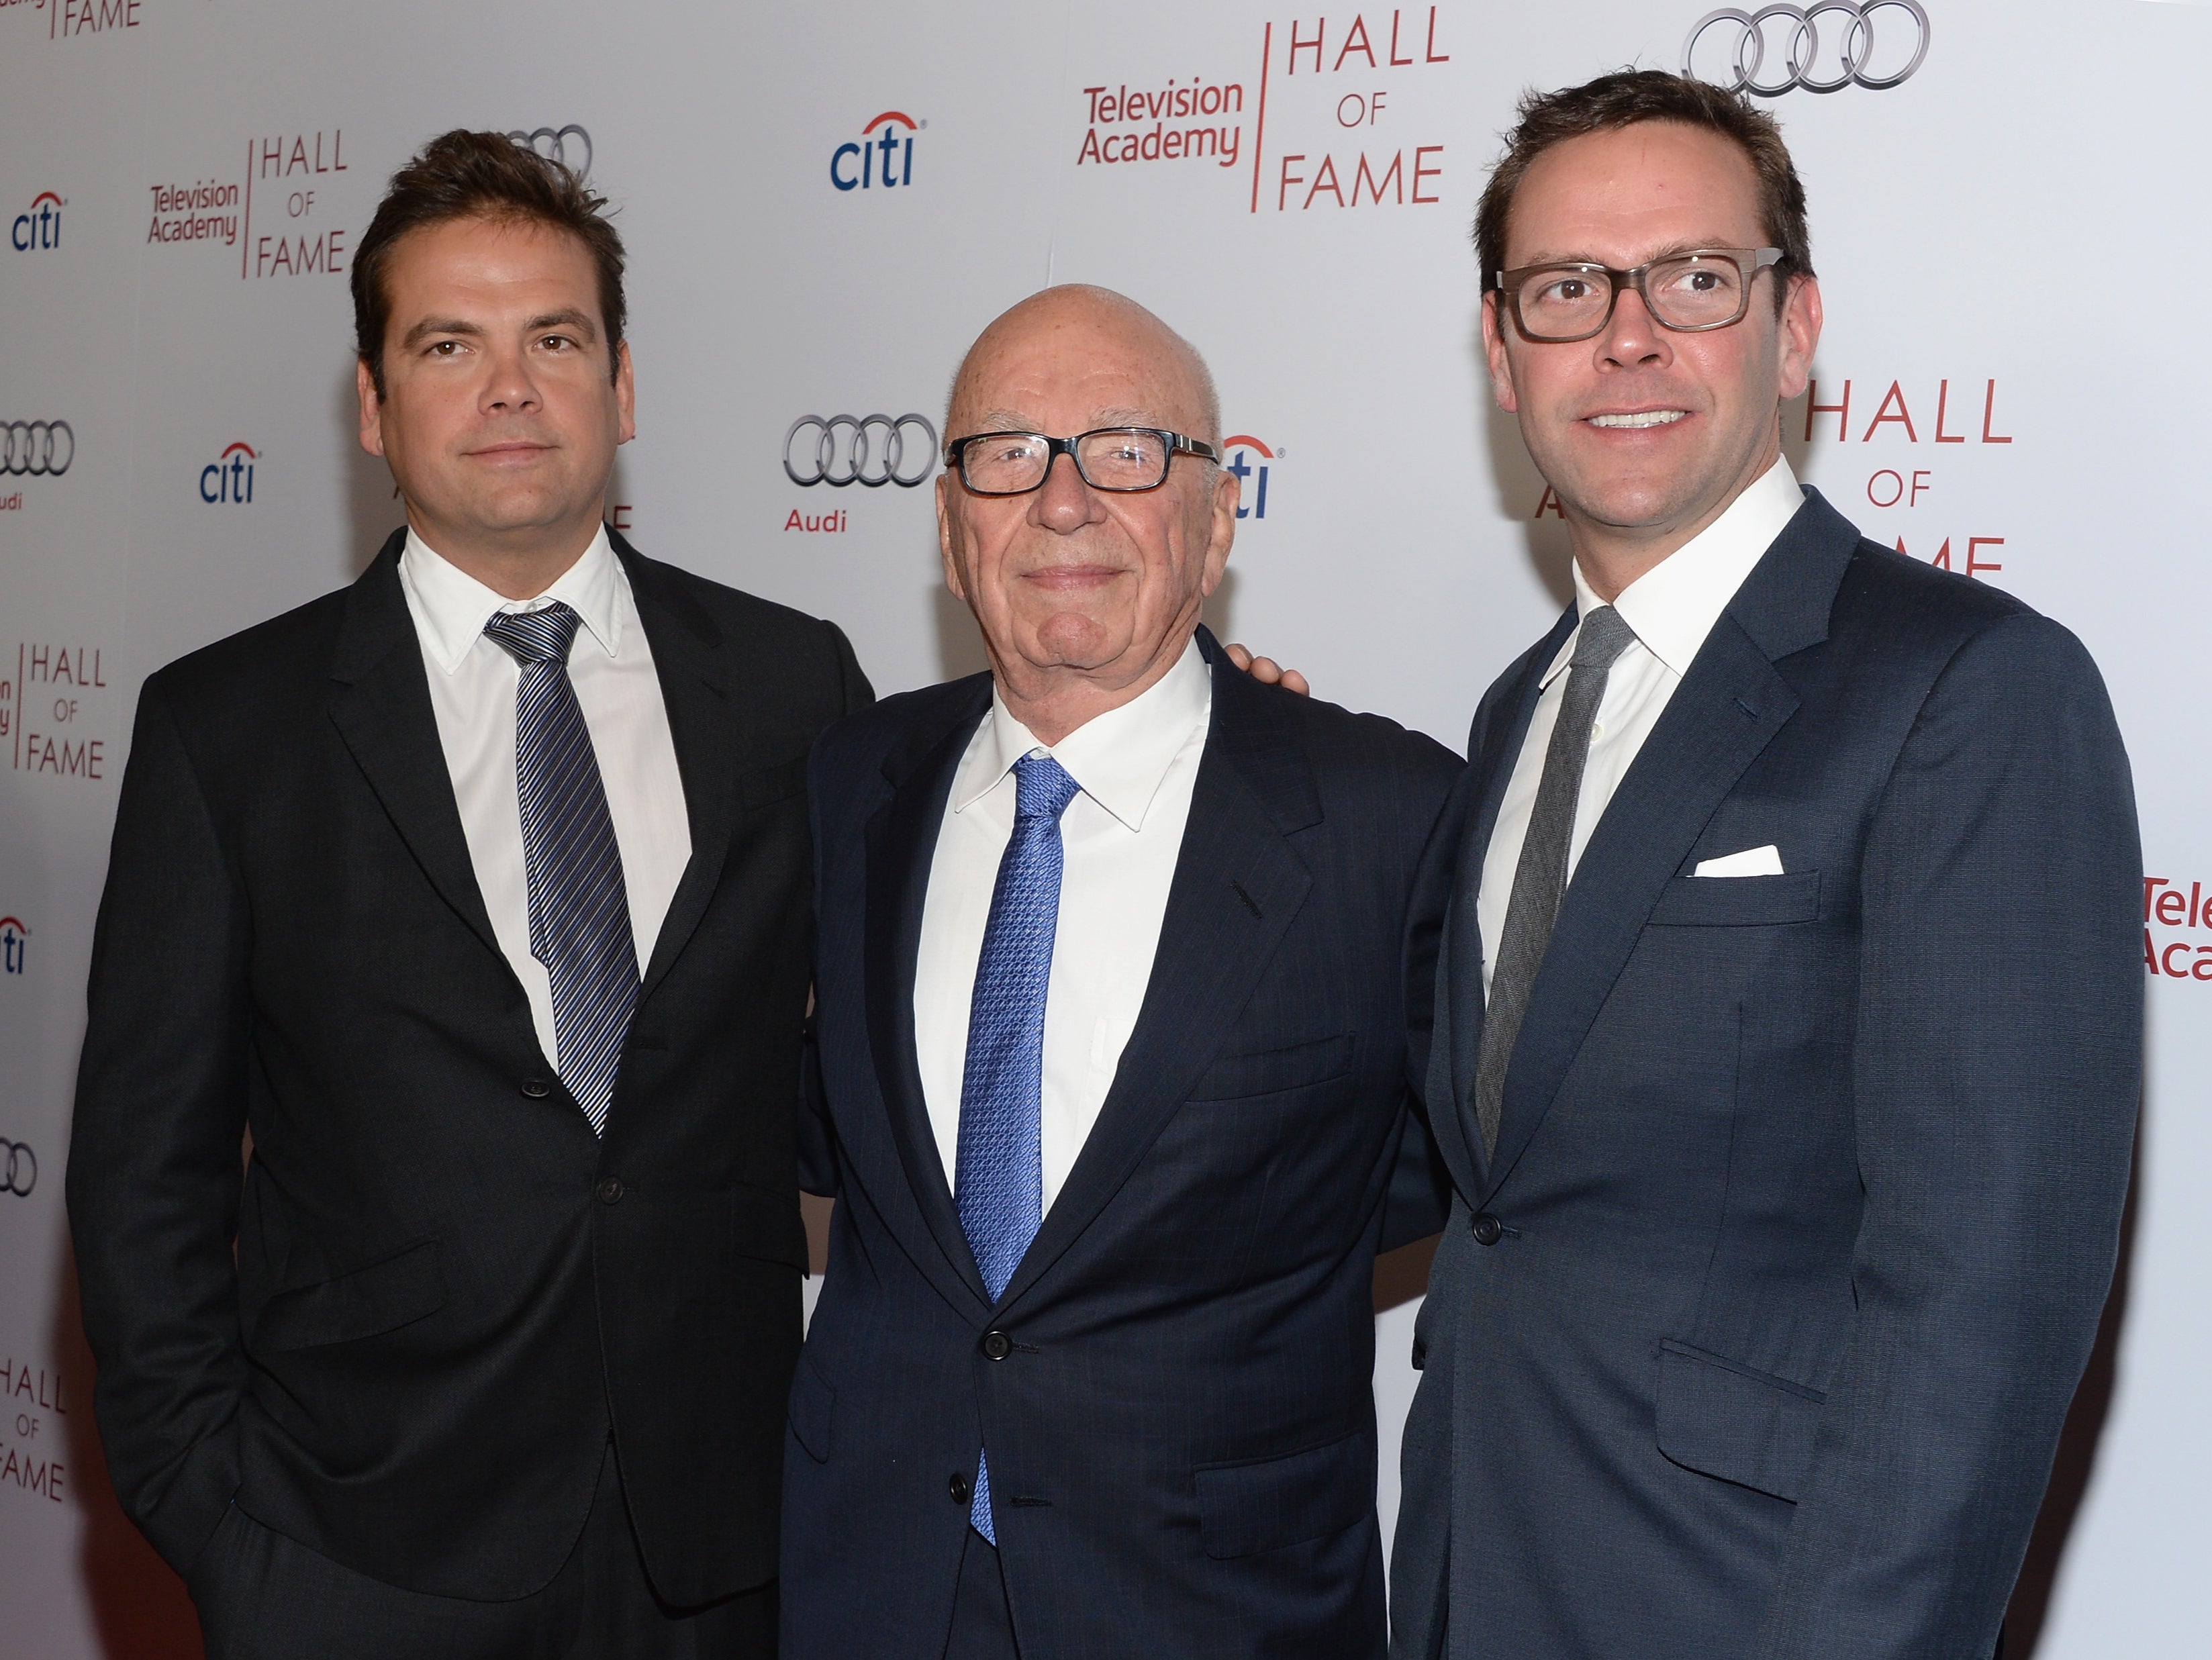 Lachlan Murdoch, Rupert Murdoch and James Murdoch attend The Television Academy's 23rd Hall Of Fame Induction Gala at Regent Beverly Wilshire Hotel